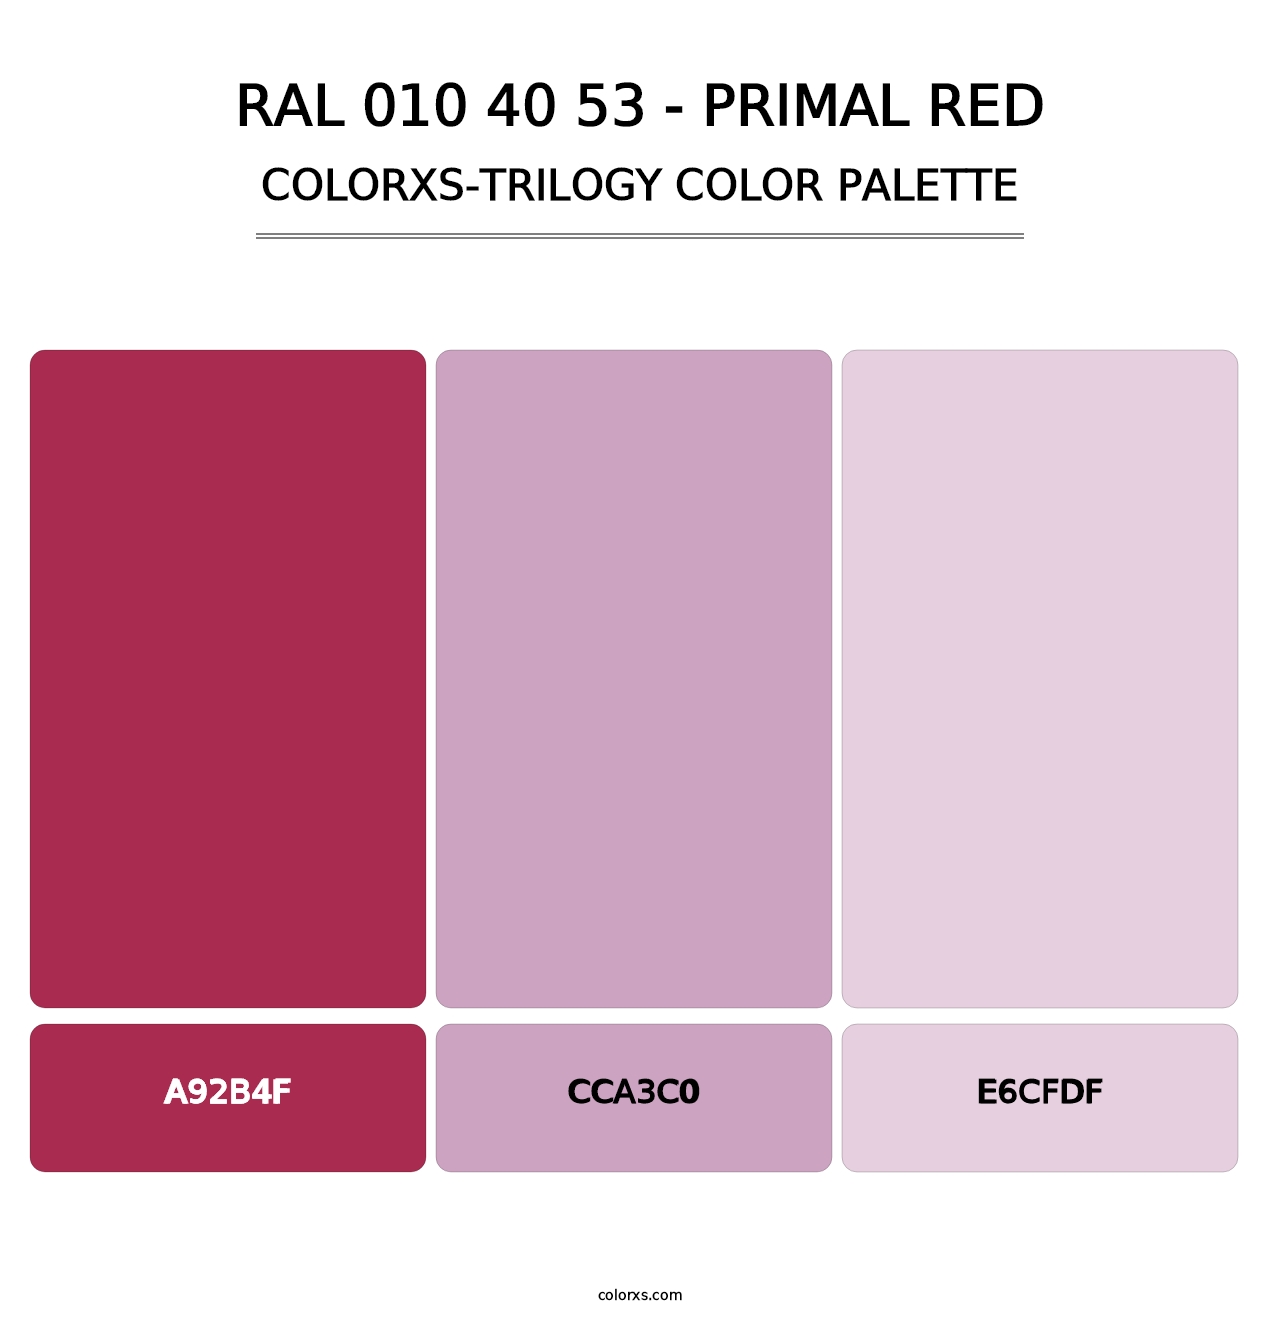 RAL 010 40 53 - Primal Red - Colorxs Trilogy Palette